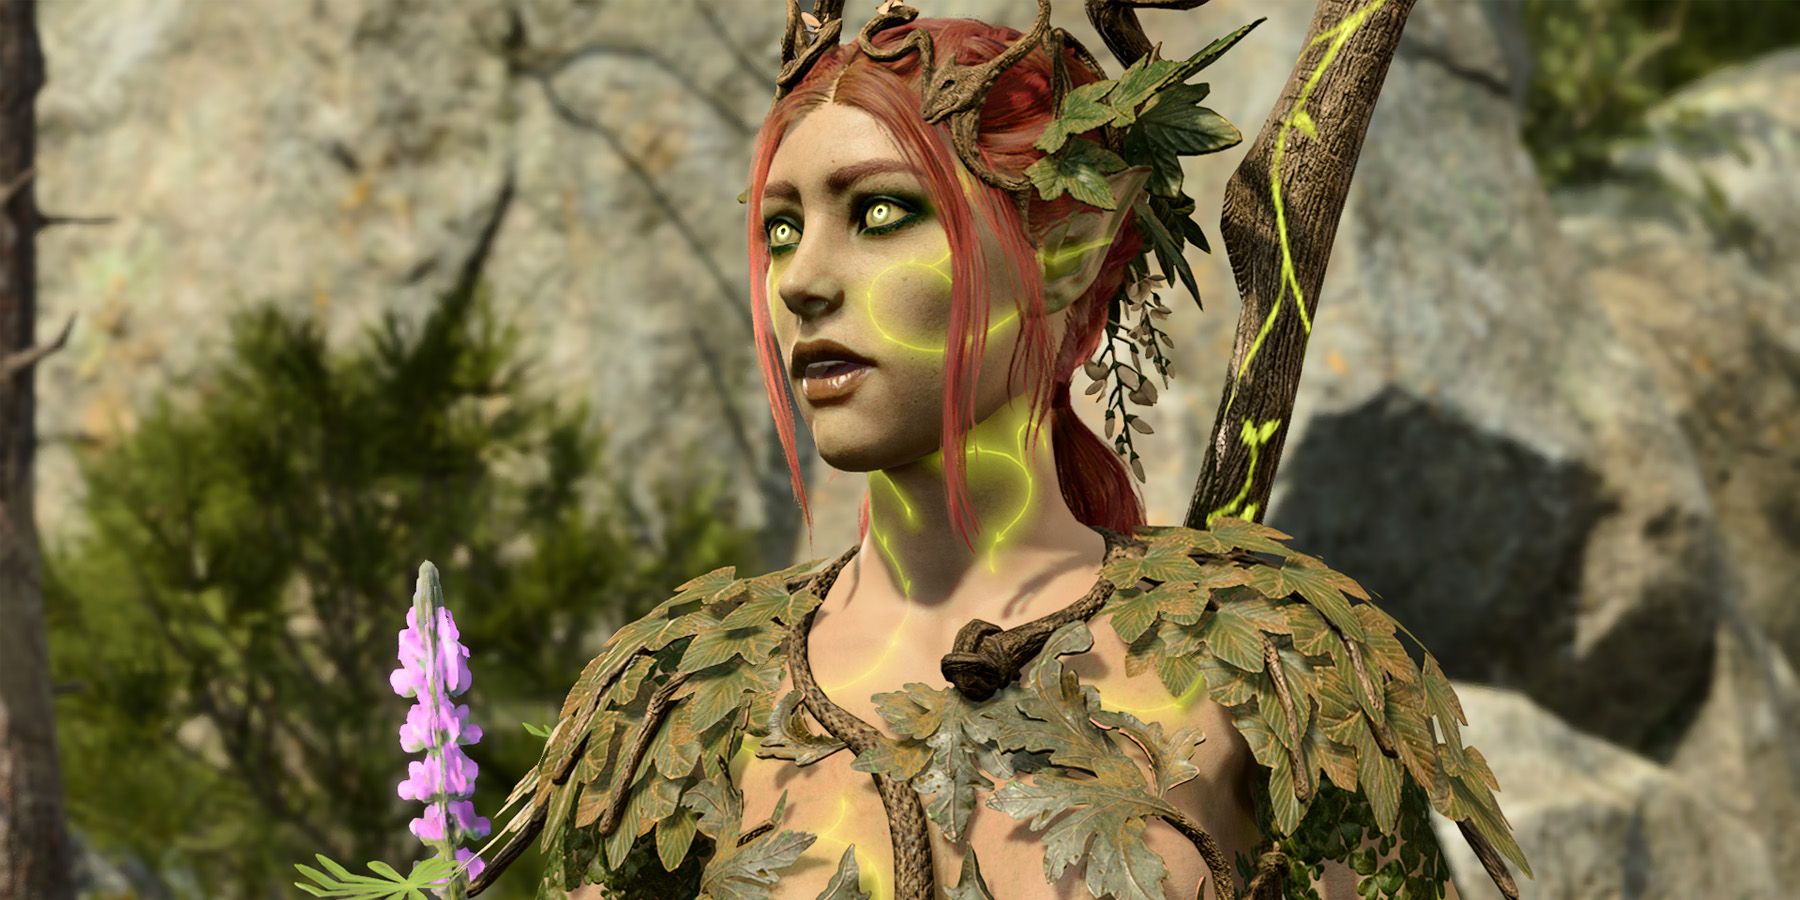 Dryad Zethino in a nature environment in Baldur's Gate 3.